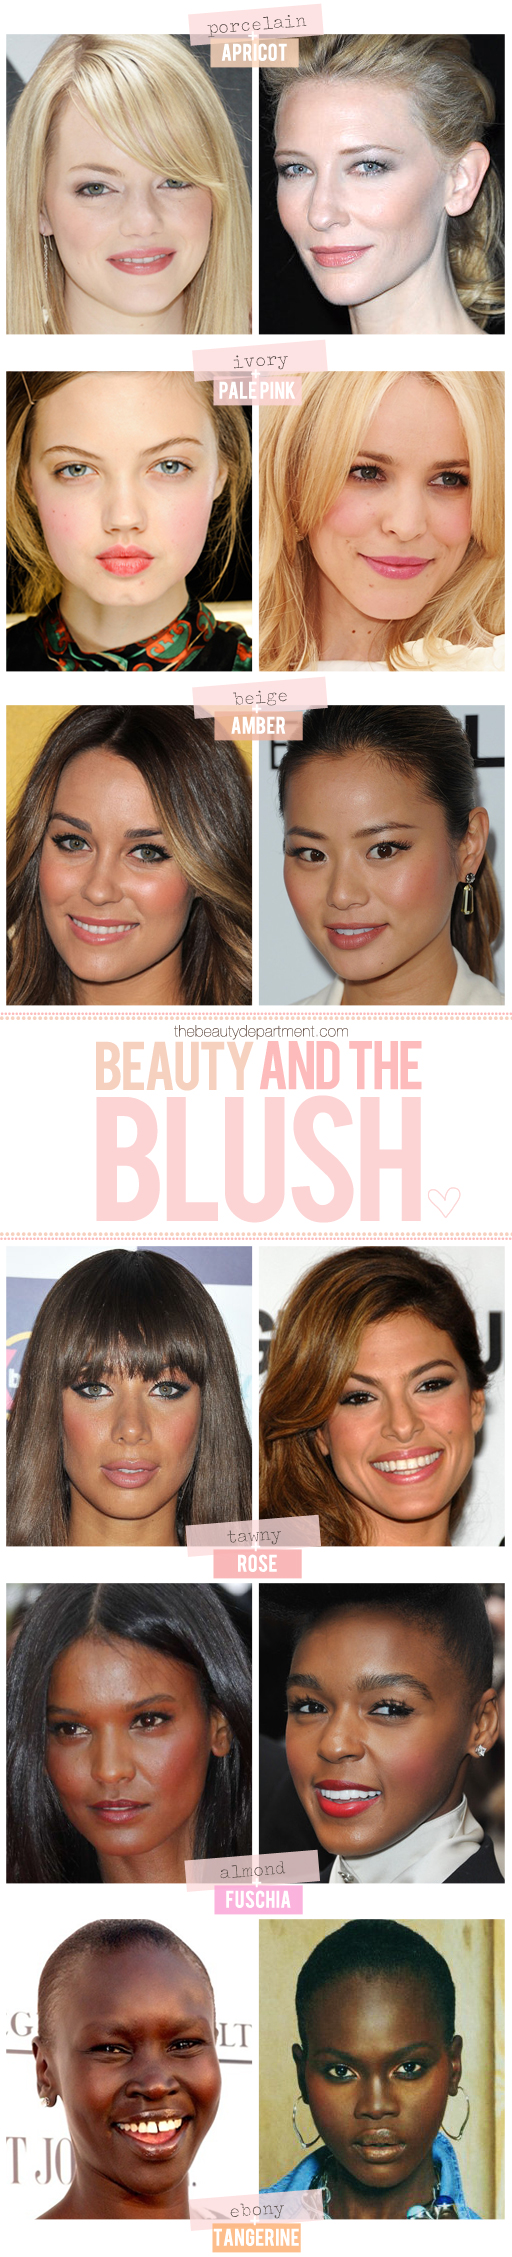 TheBeautyDepartment.com-Best-Blush-For-Skin-Tones.jpeg